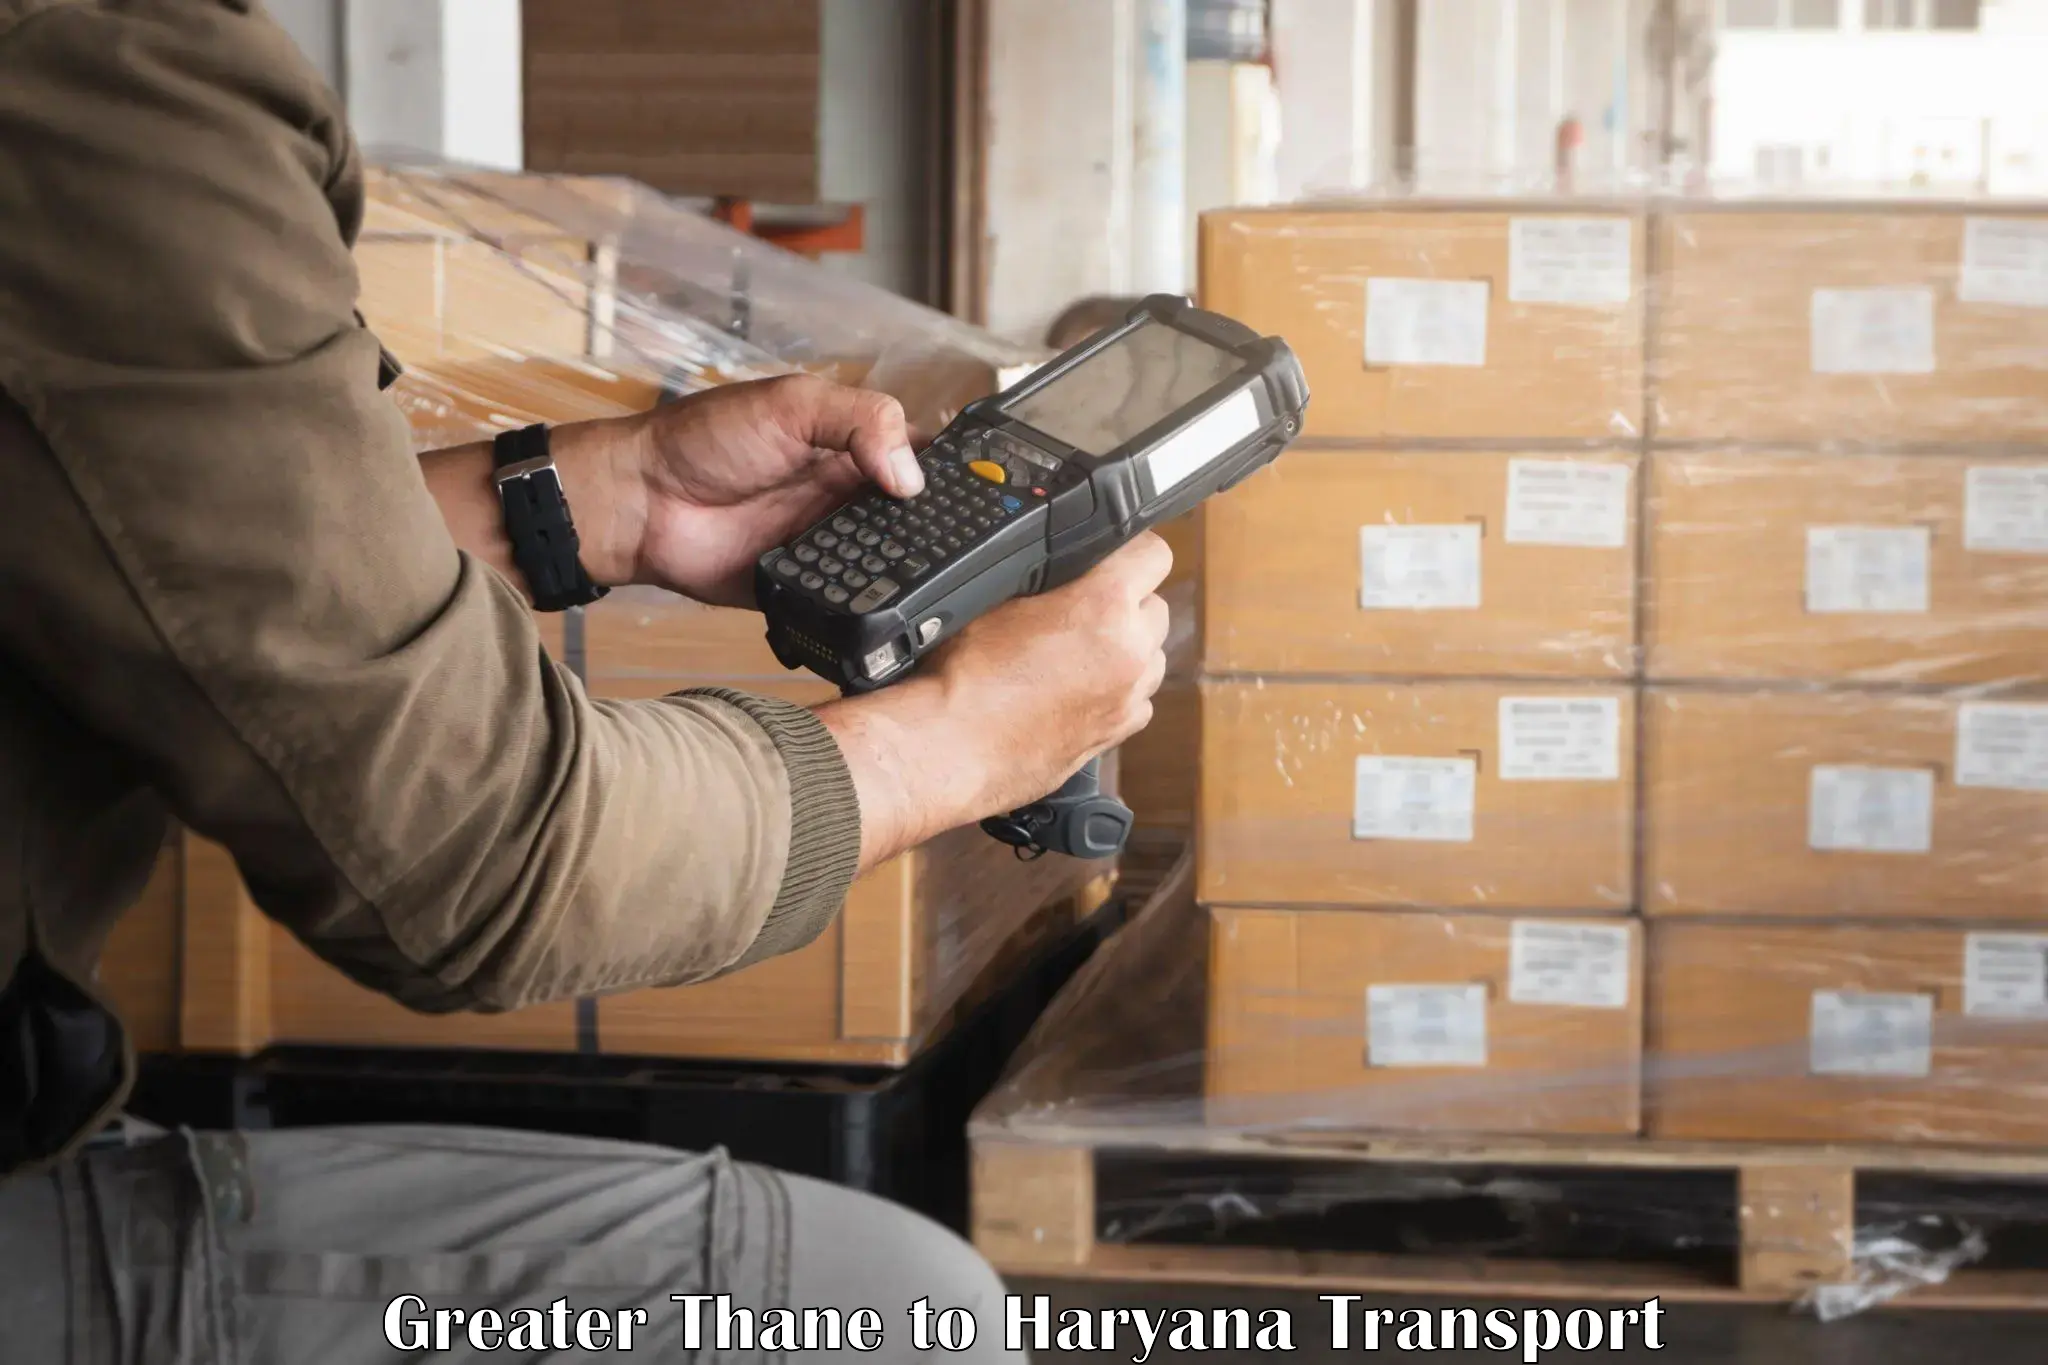 Goods delivery service in Greater Thane to Gurgaon